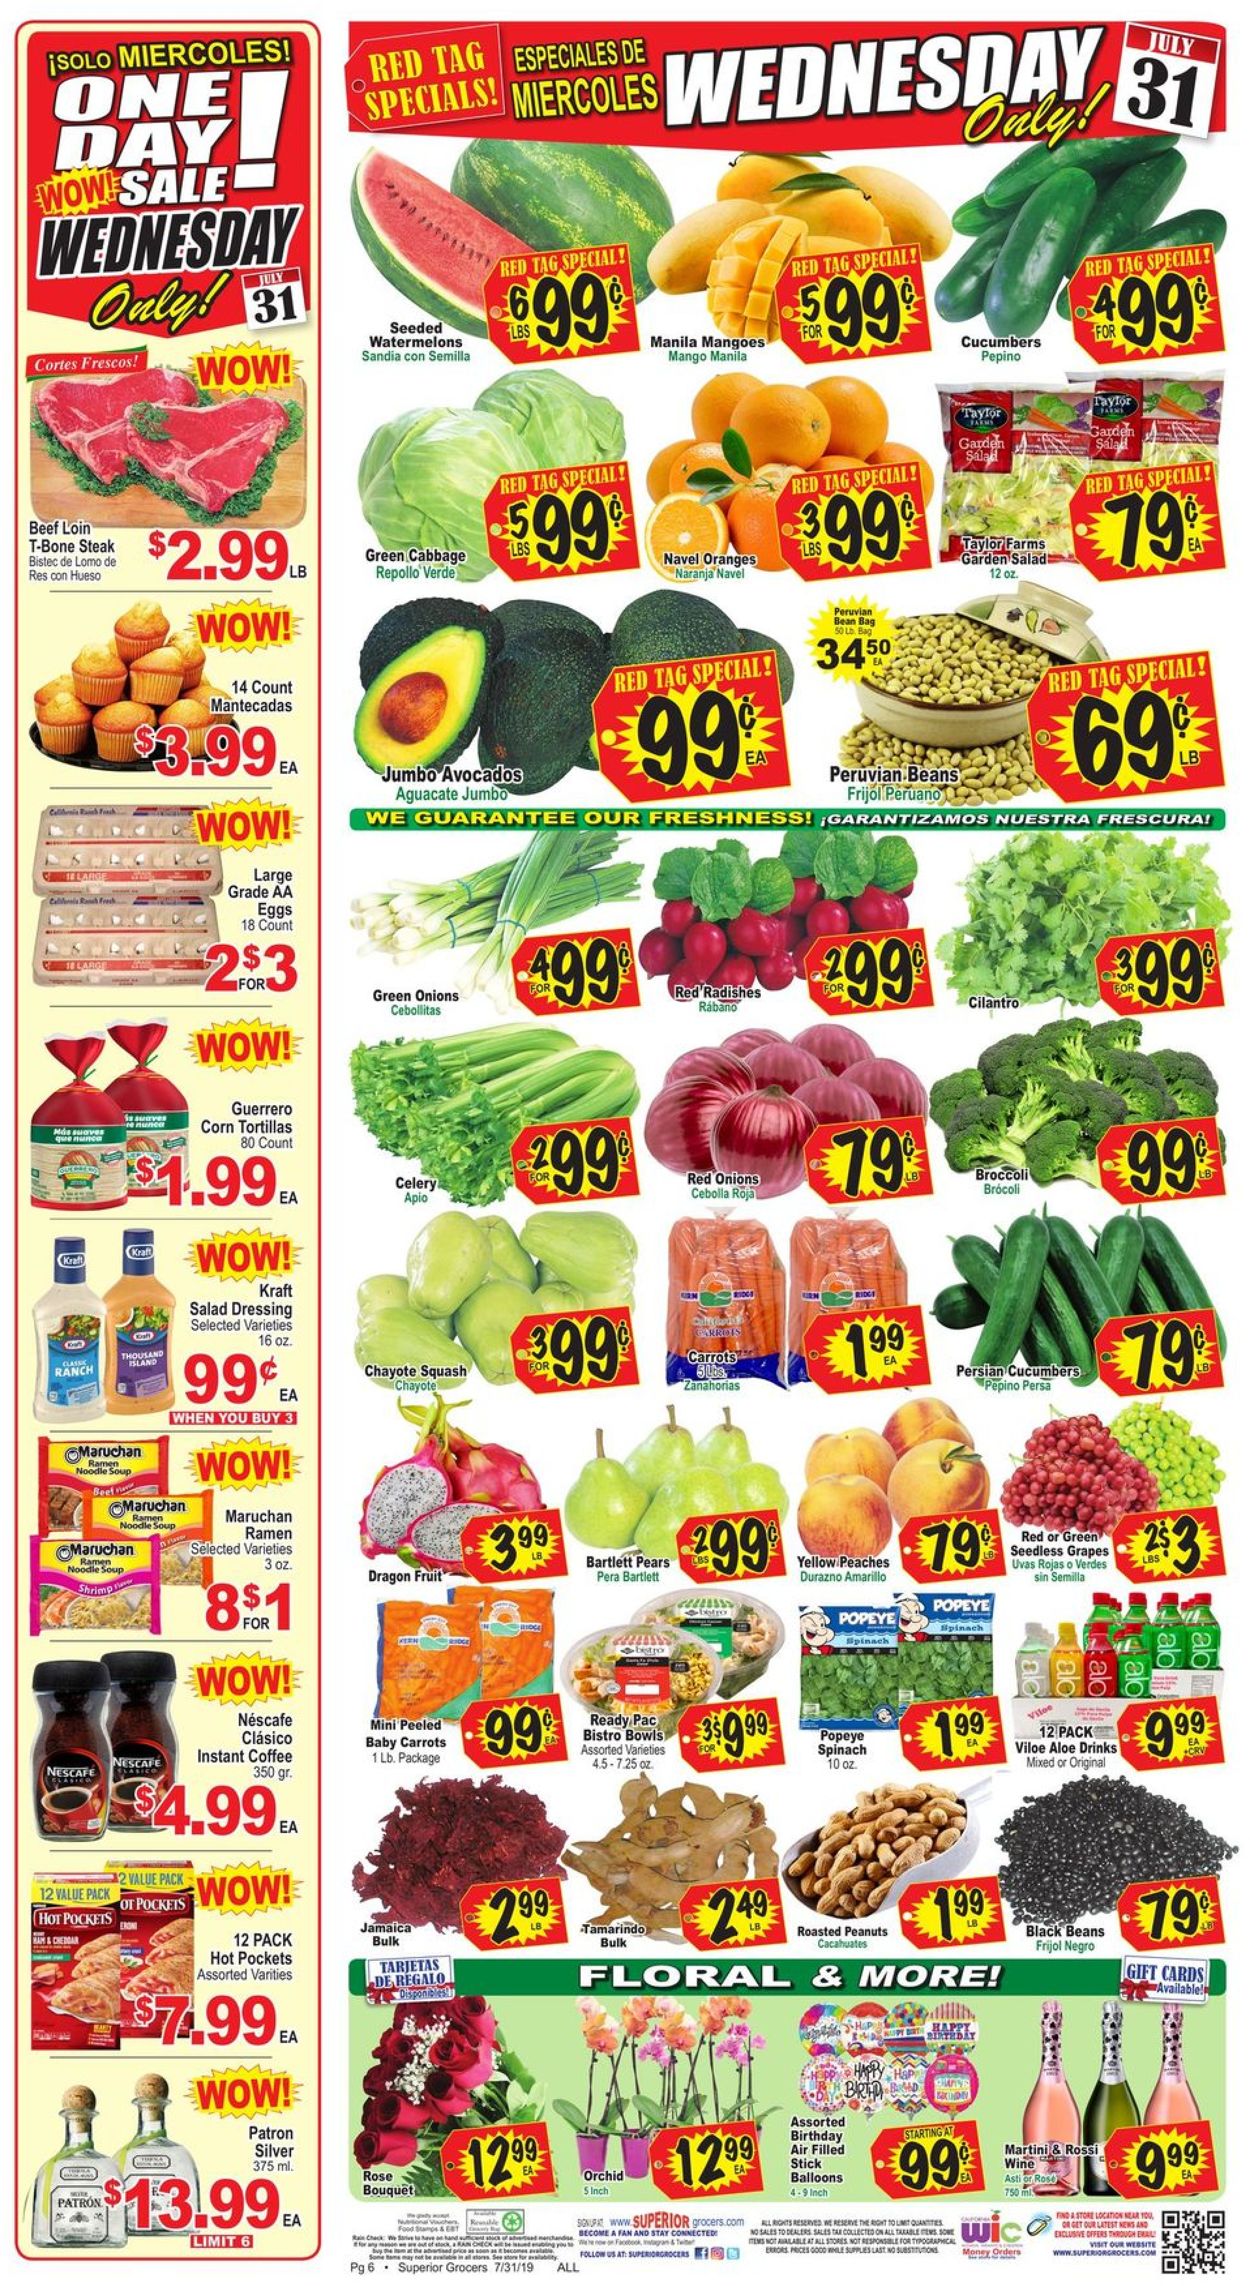 Catalogue Superior Grocers from 07/31/2019